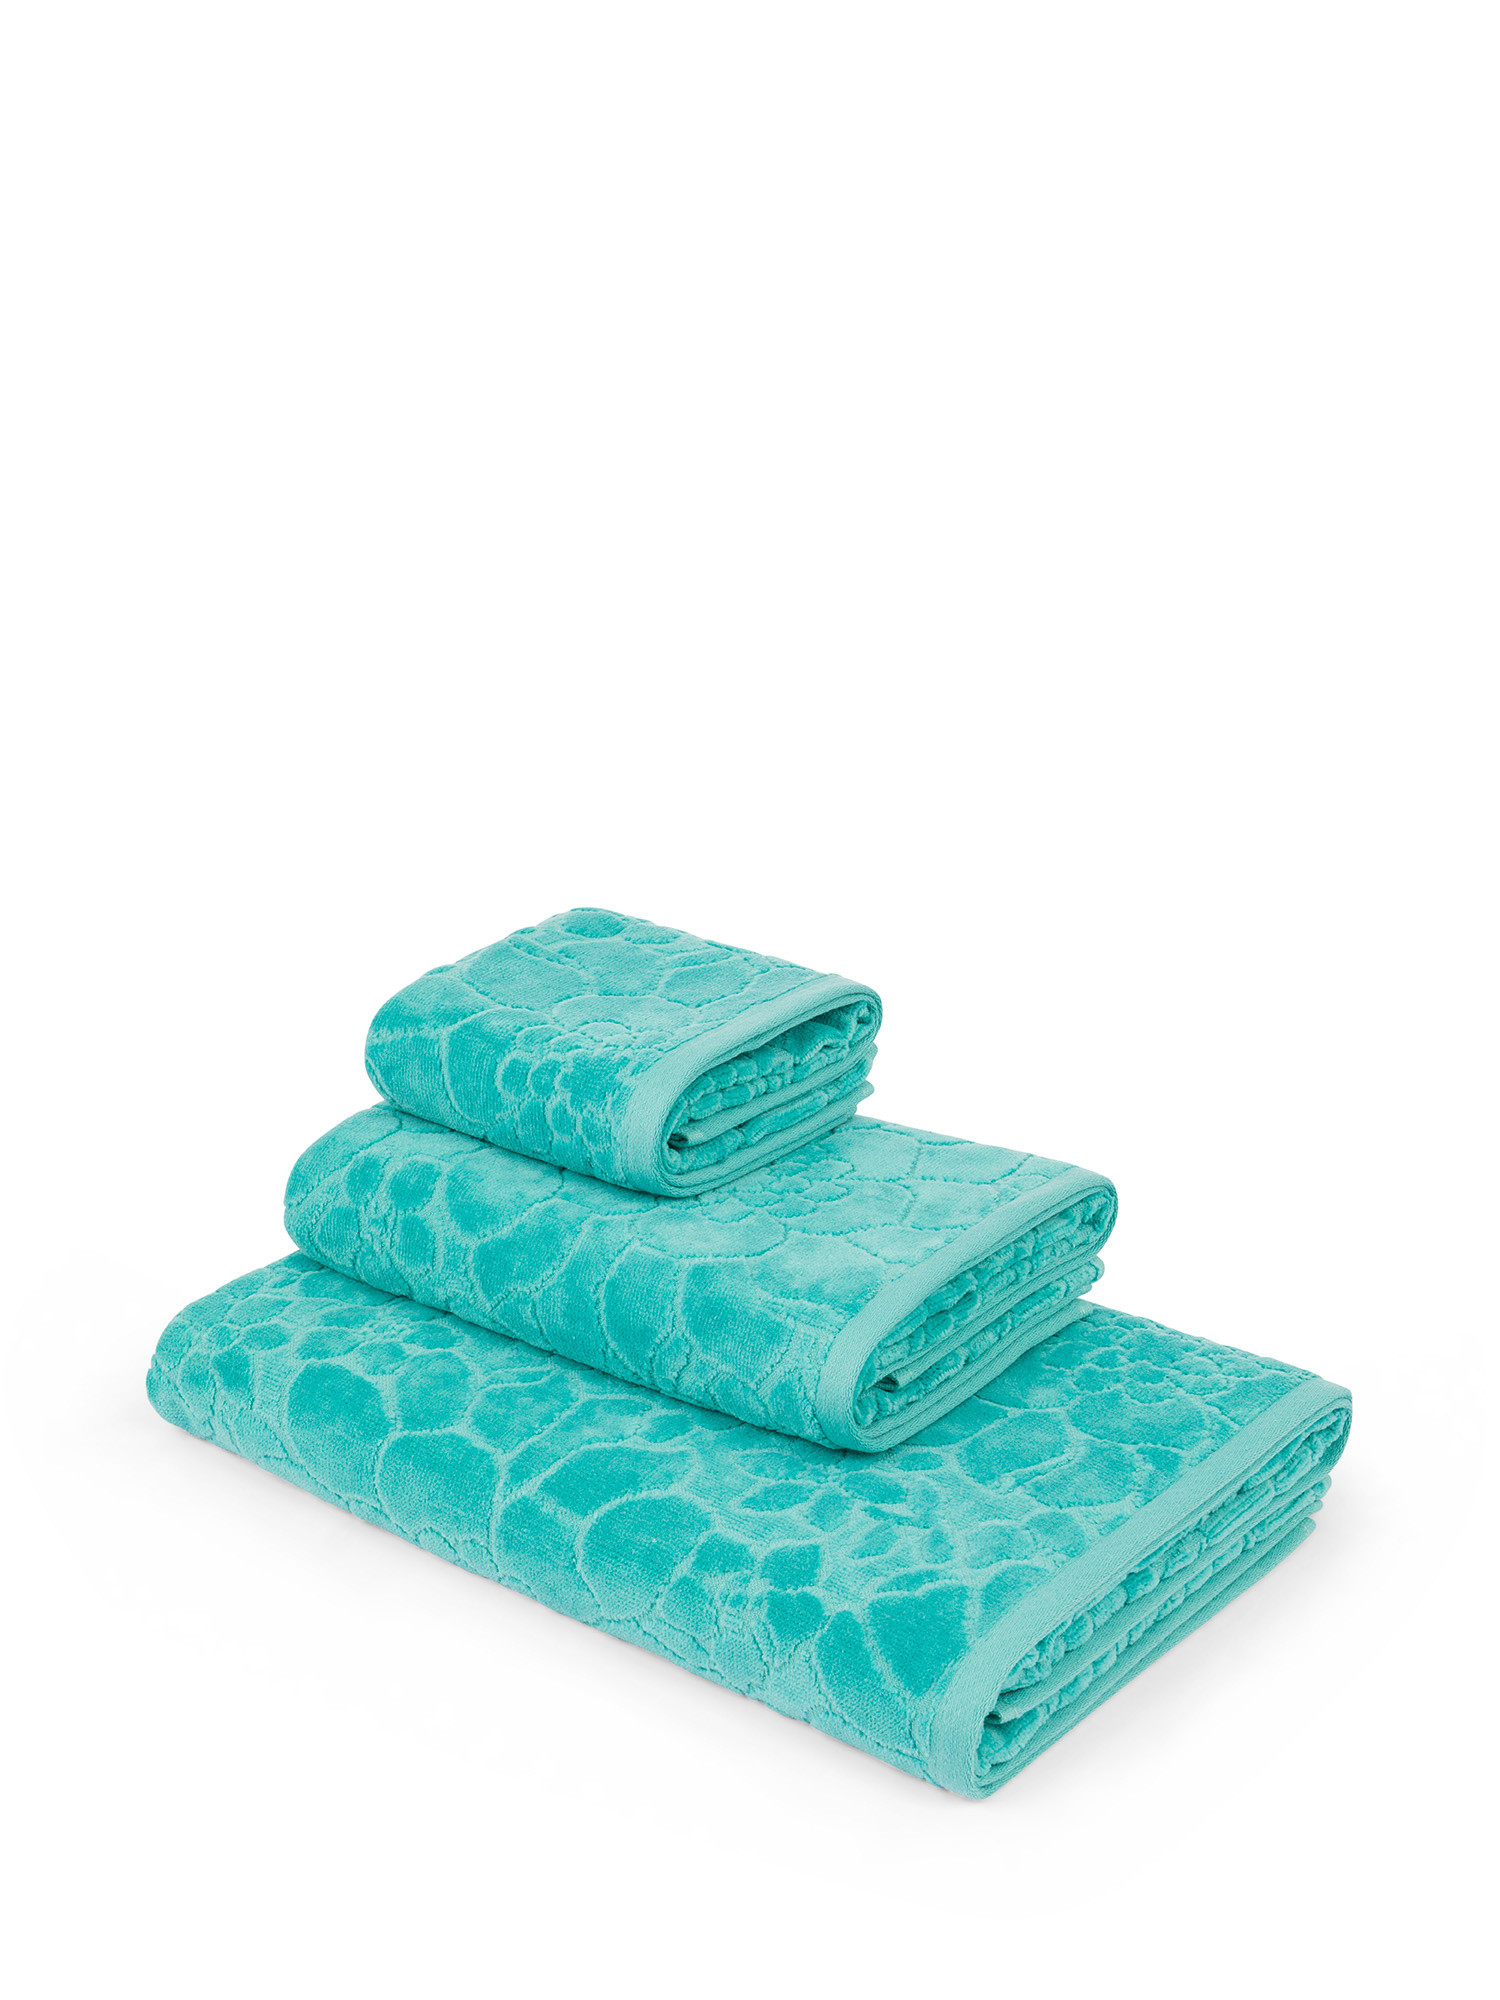 Velor cotton towel with raised floral pattern, Teal, large image number 0